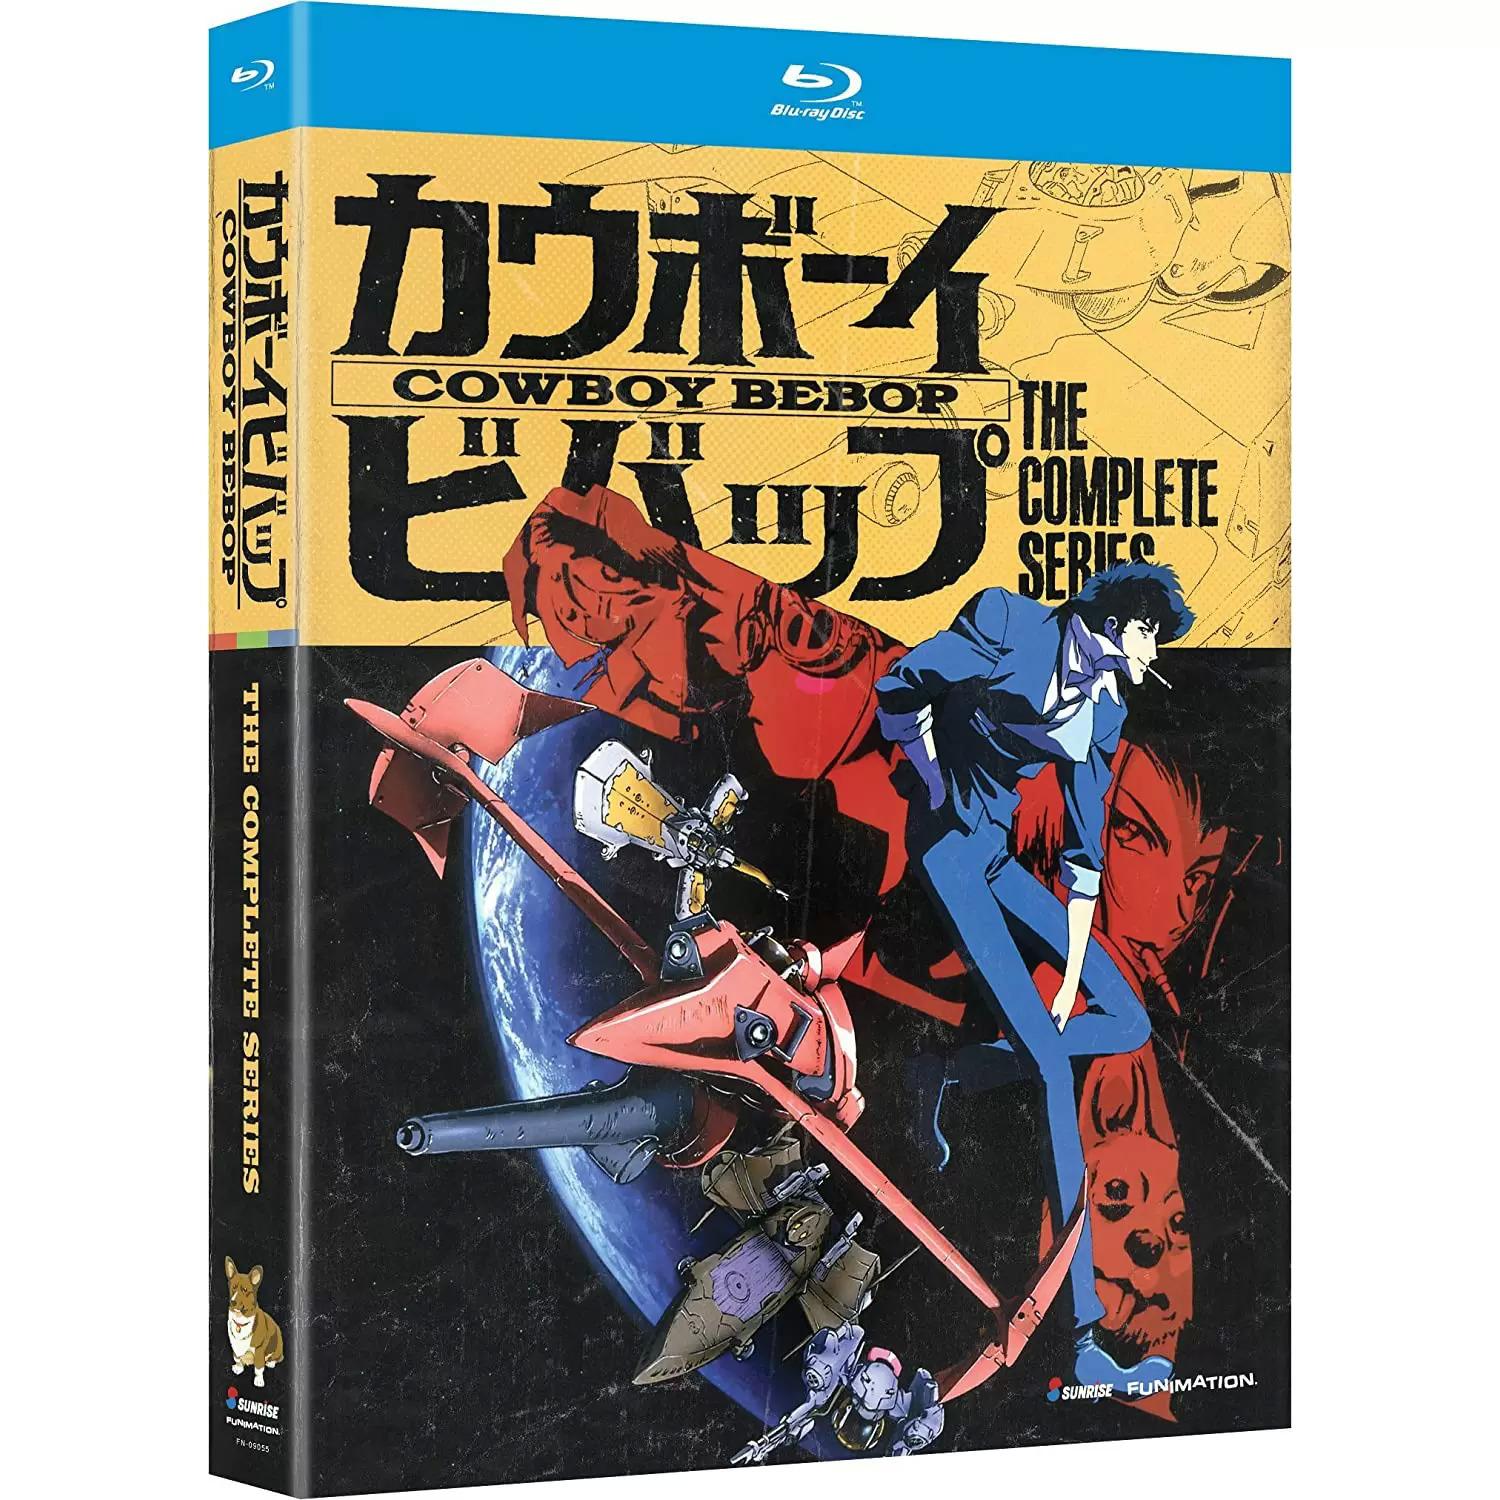 Cowboy Bebop The Complete Series Blu-ray Set for $12.99